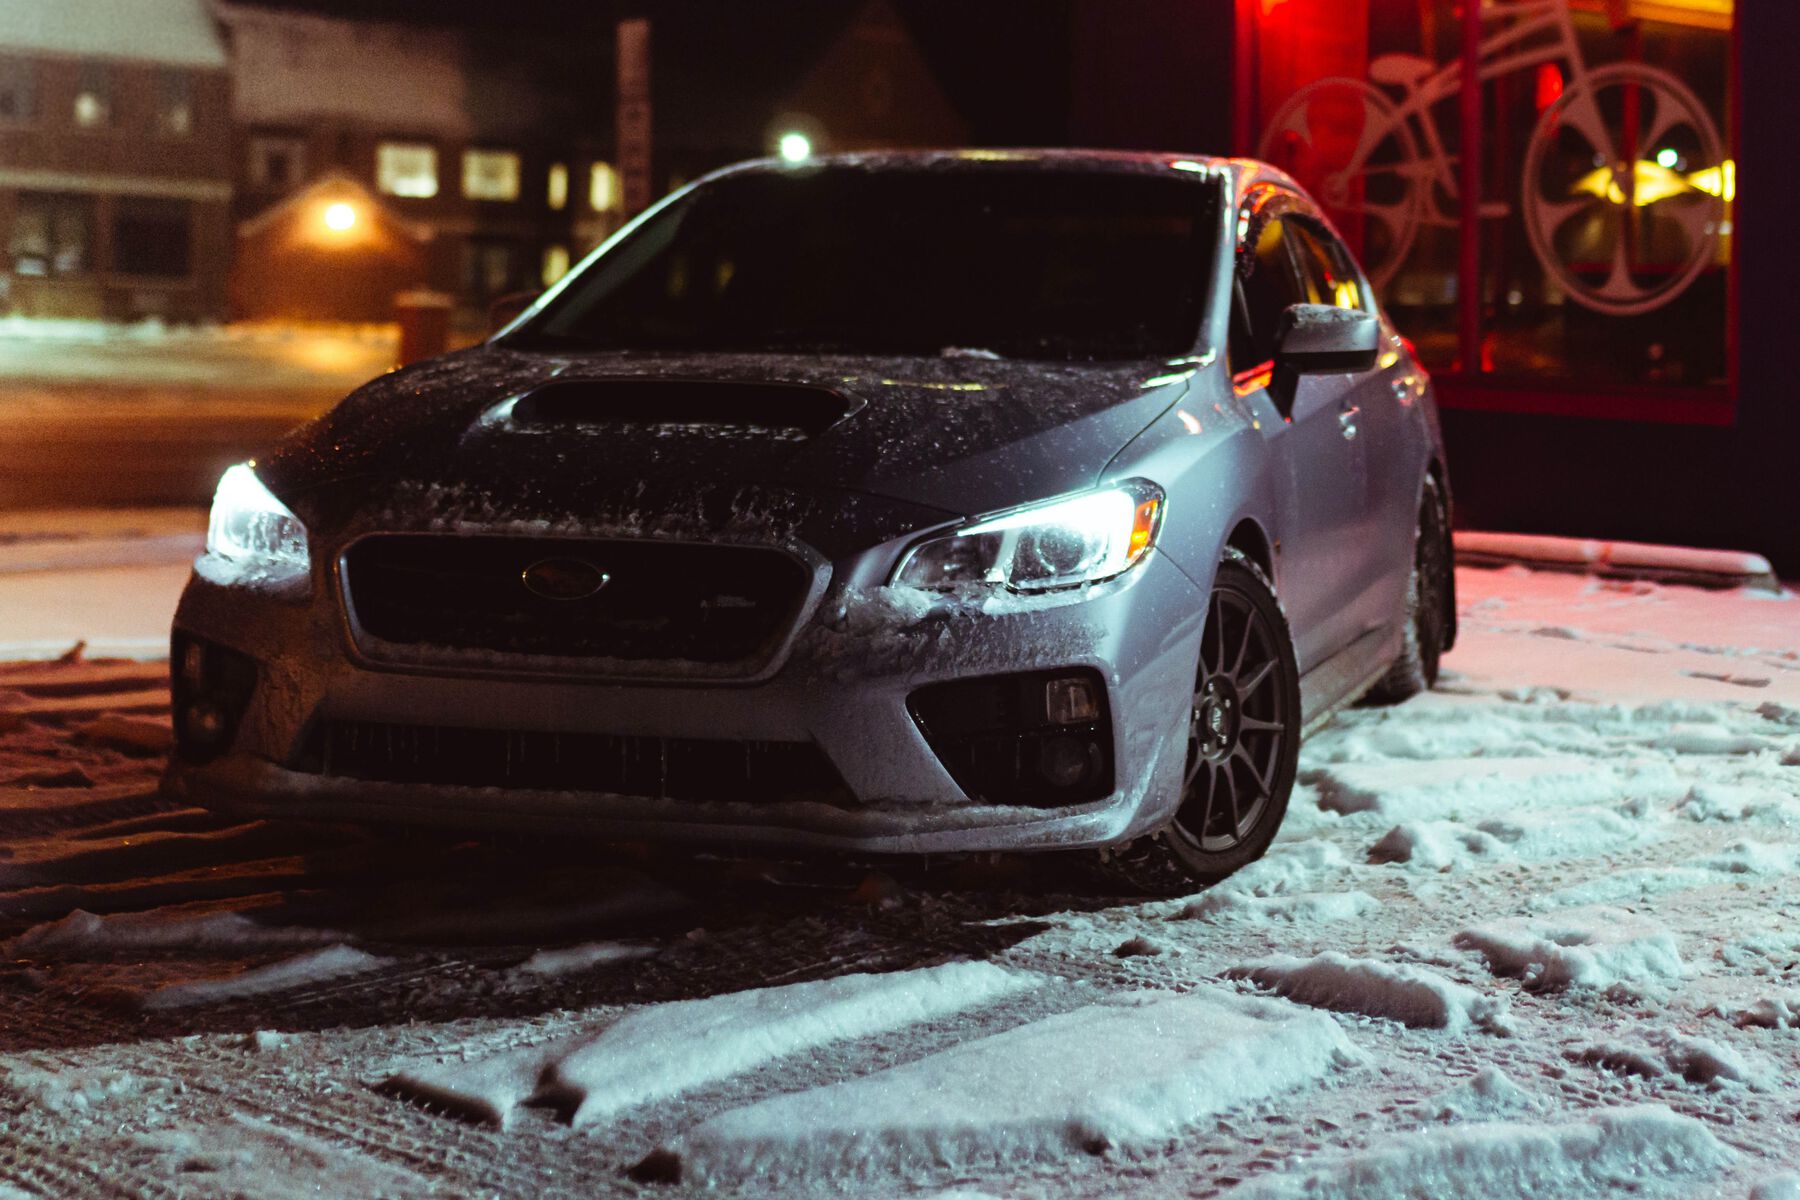 Subaru WRX in the snow with winter tires